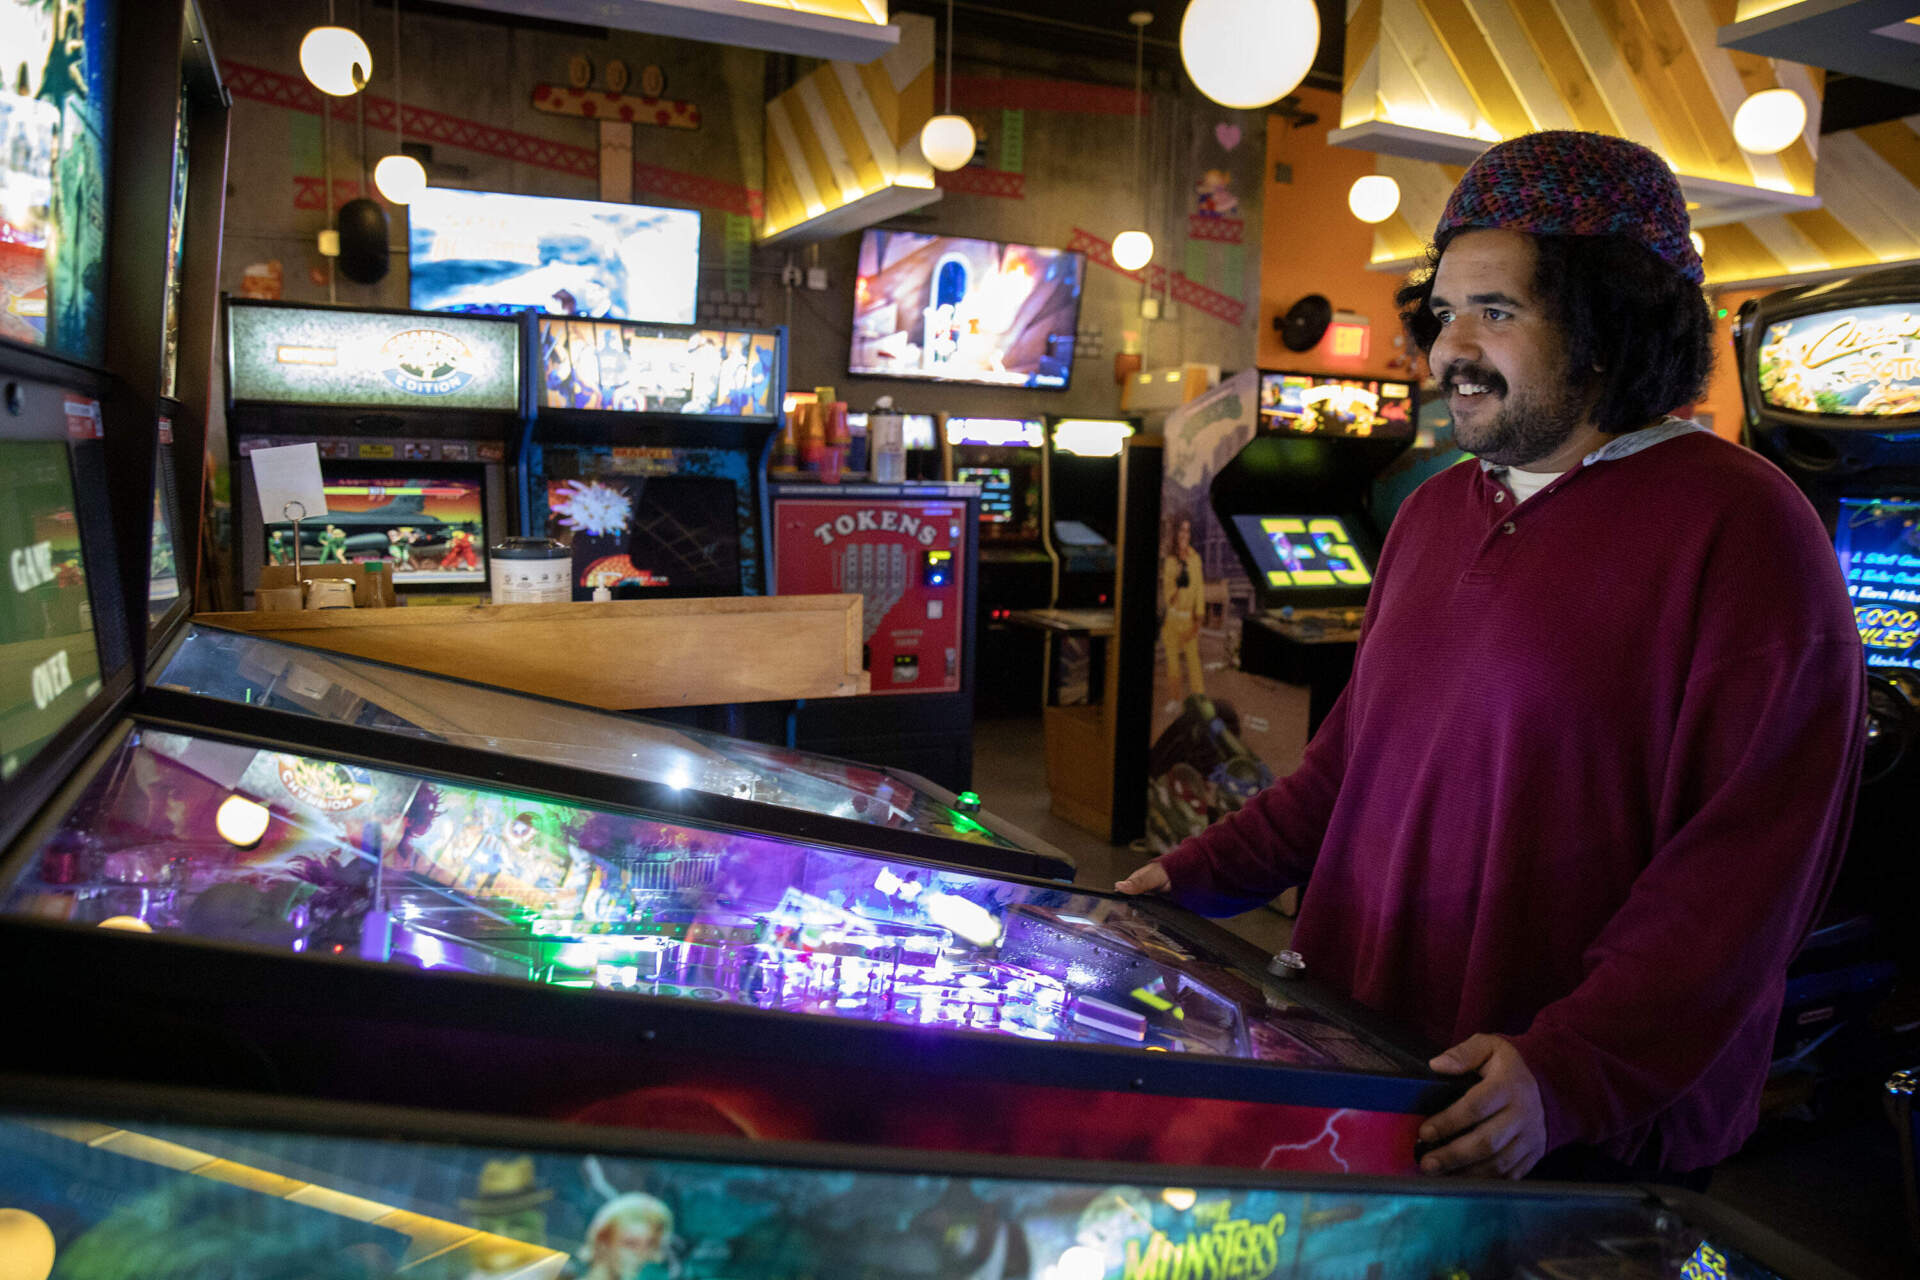 Smiling man in a burgundy-colored shirt stands at the foot of an arcade game.